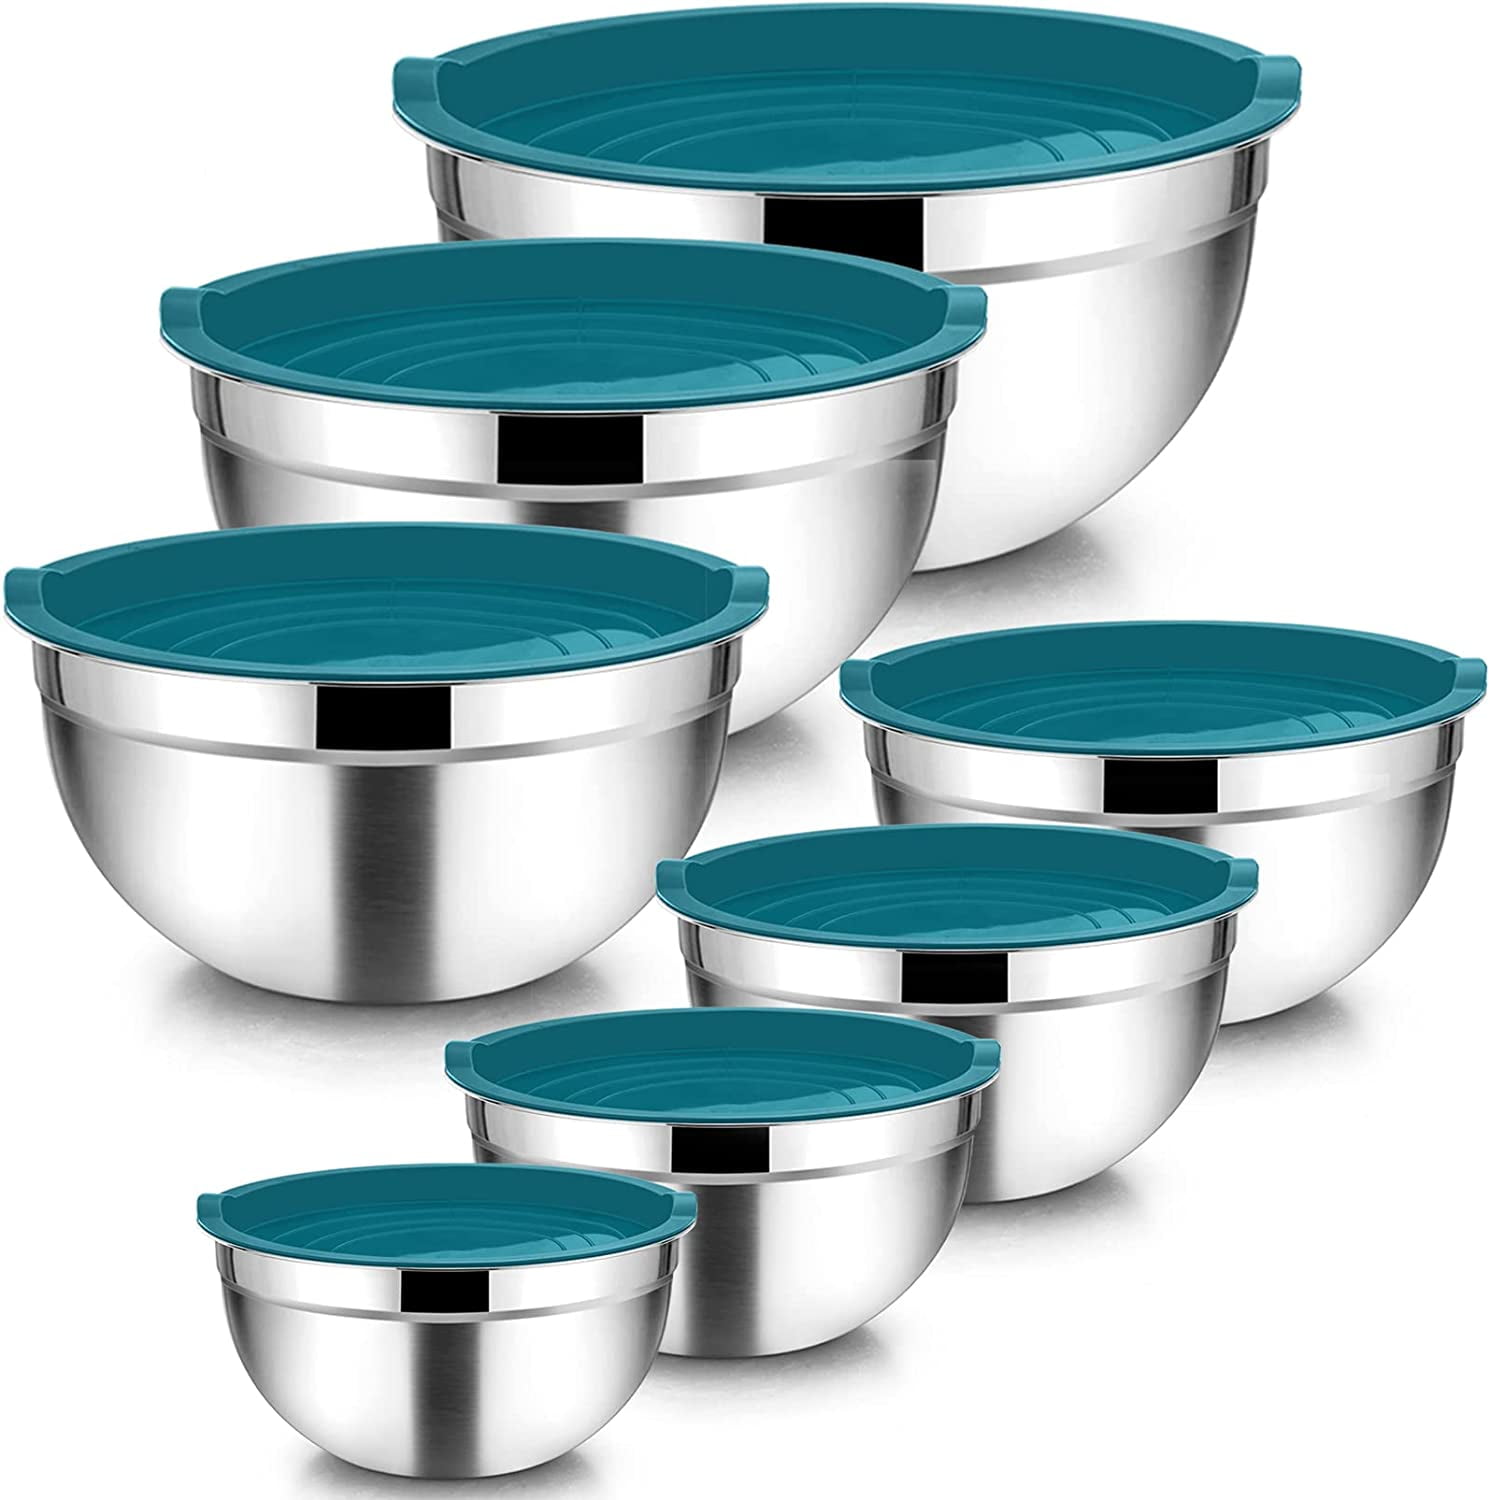 KSP Vibe Glass Mixing Bowl with Lids - Set of 10 (Multi Colour